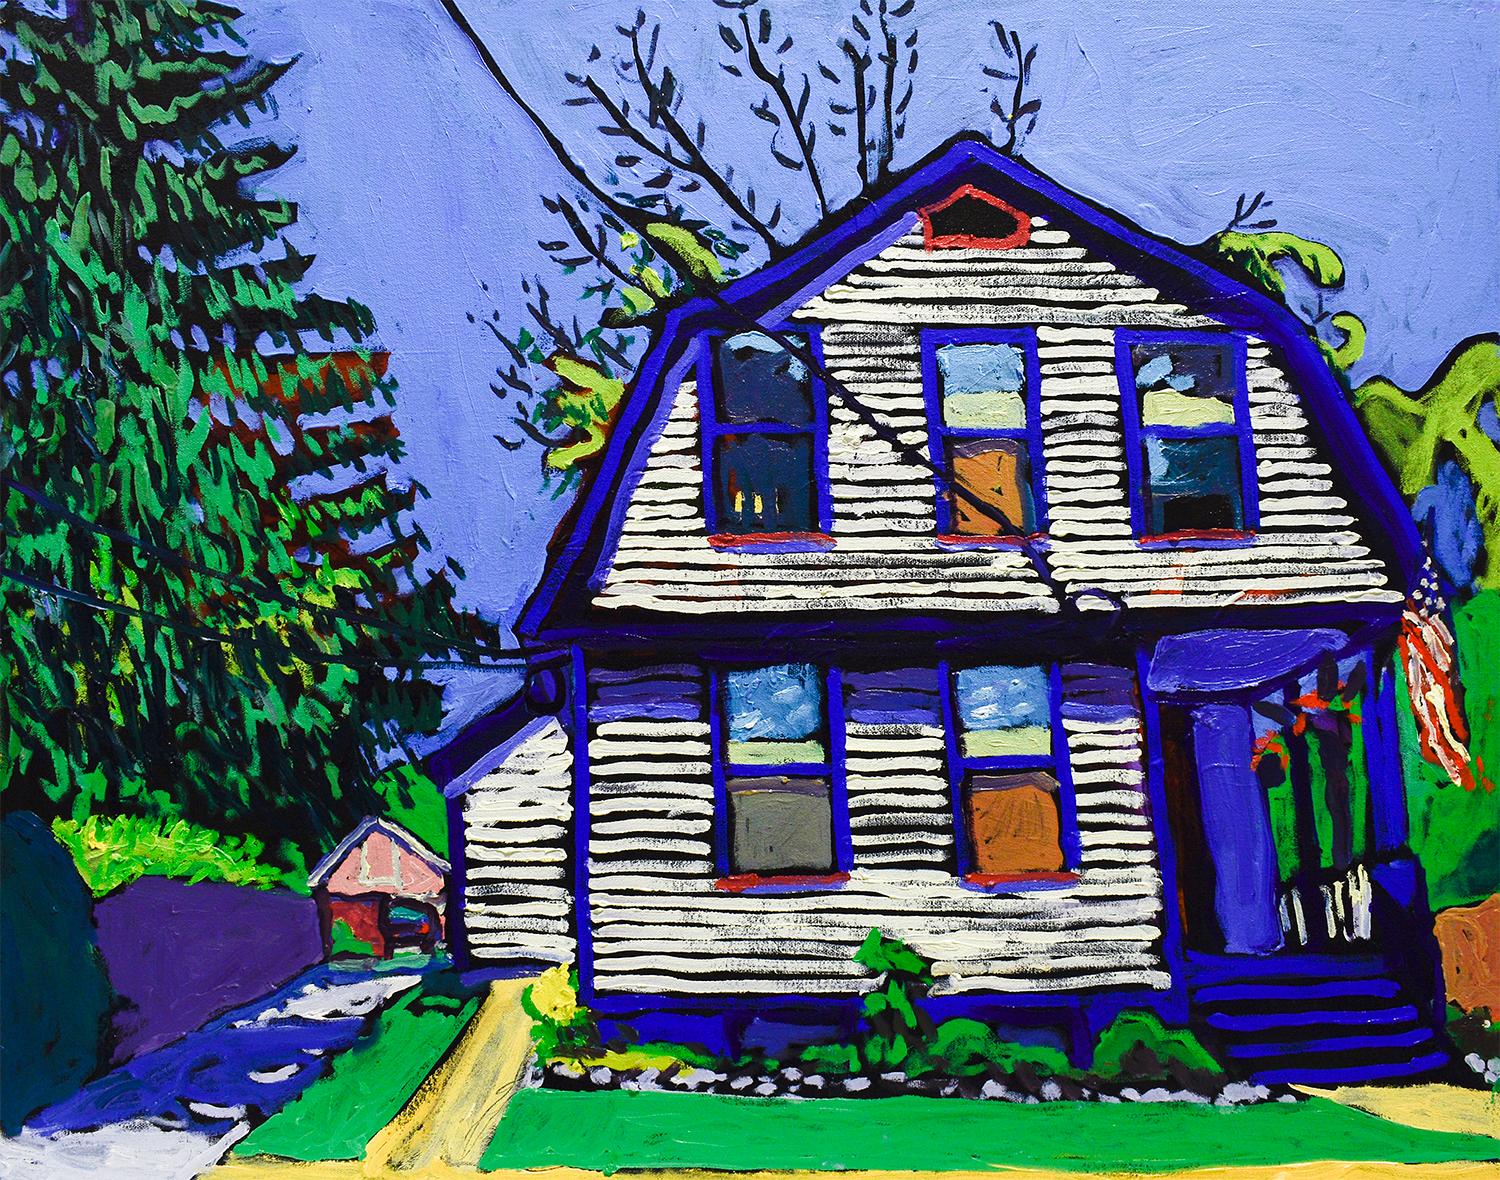 112 2nd St (Contemporary Brightly Colored Oil, White House & Blue Trim)